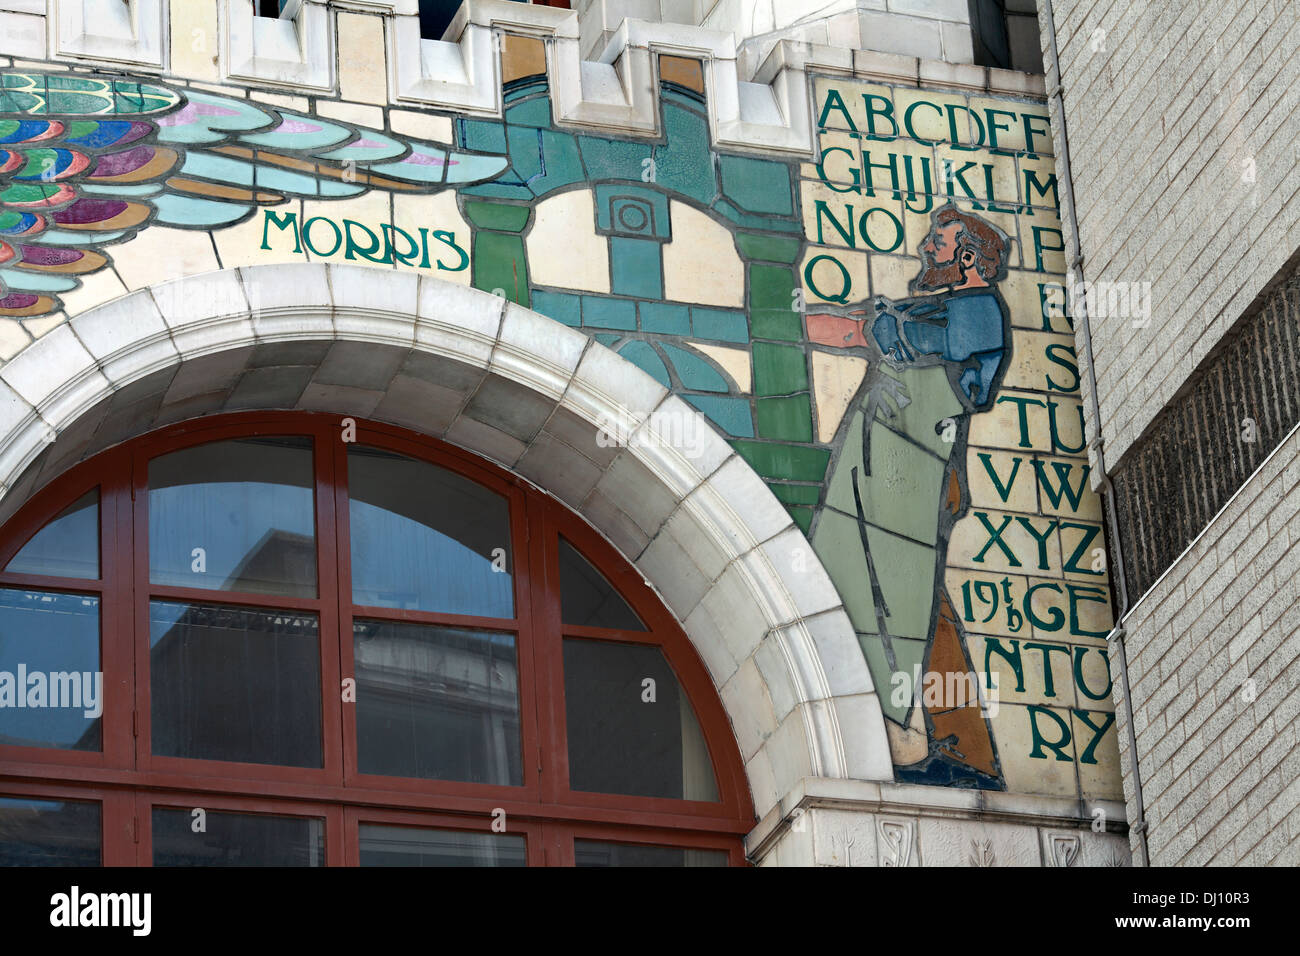 A mural depicting William Morris at a printing press, on the facade of the former Edward Everard's print works, Bristol. Stock Photo